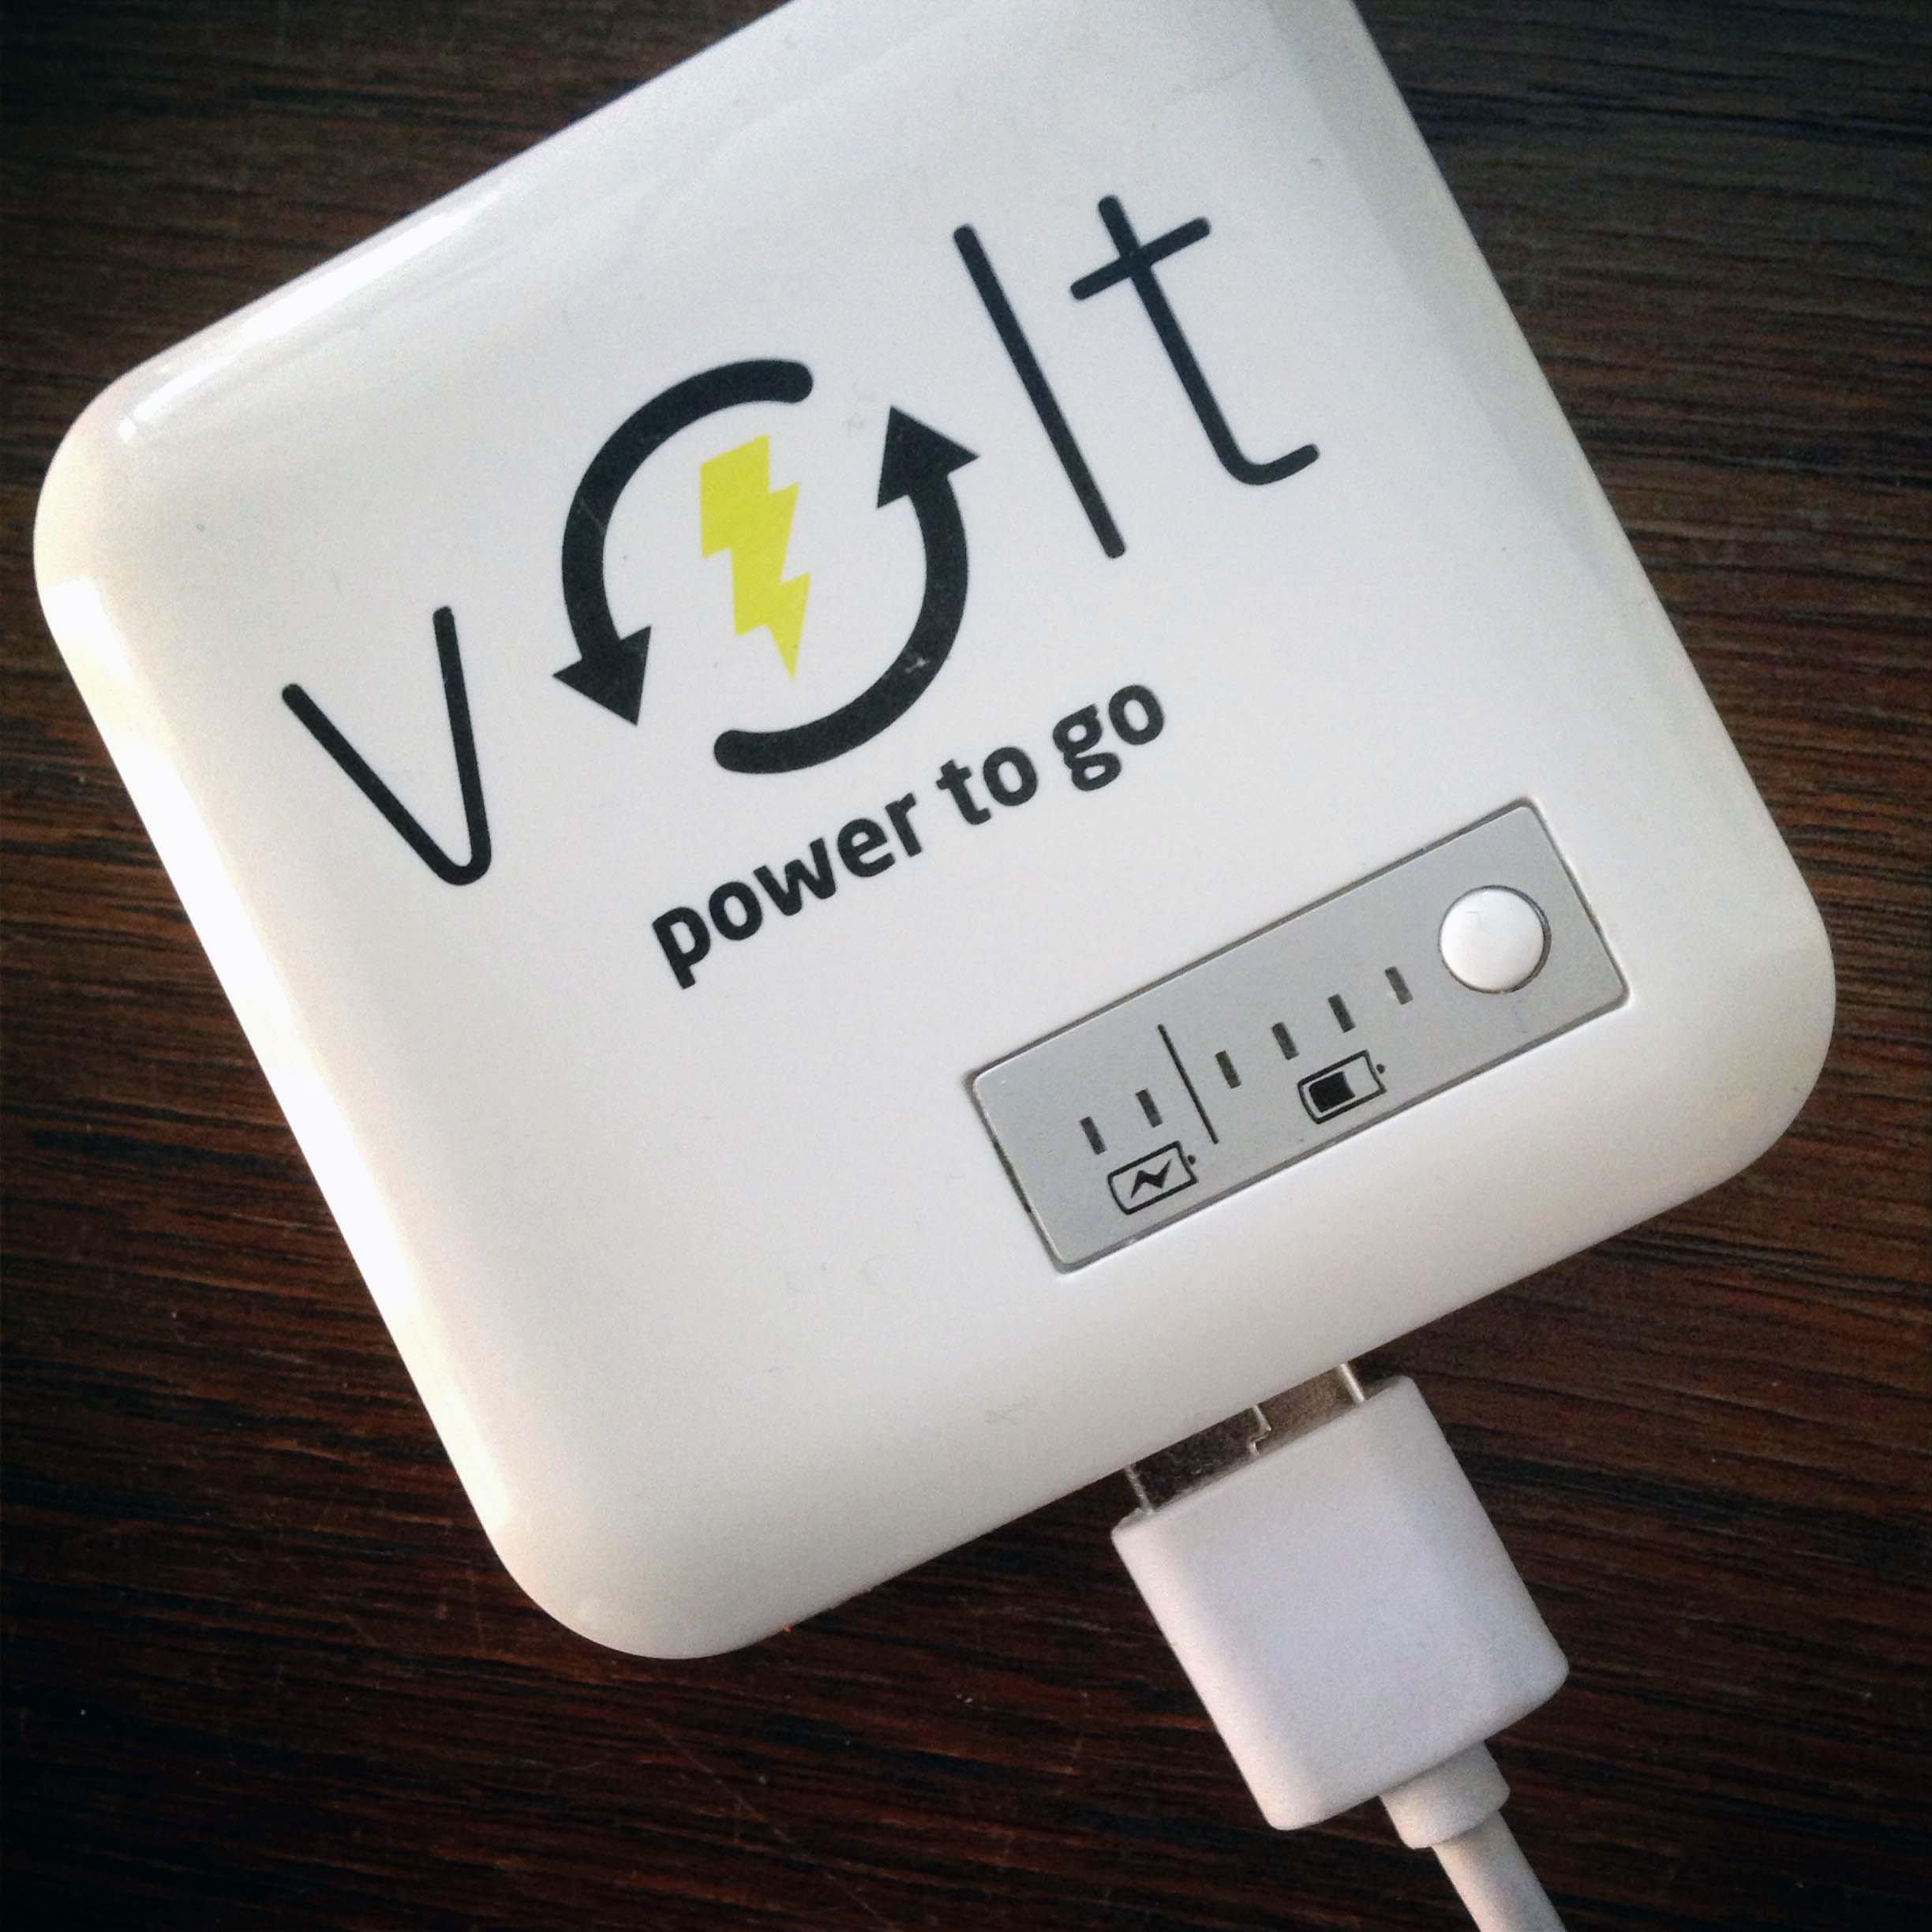 Power to go from Volt.